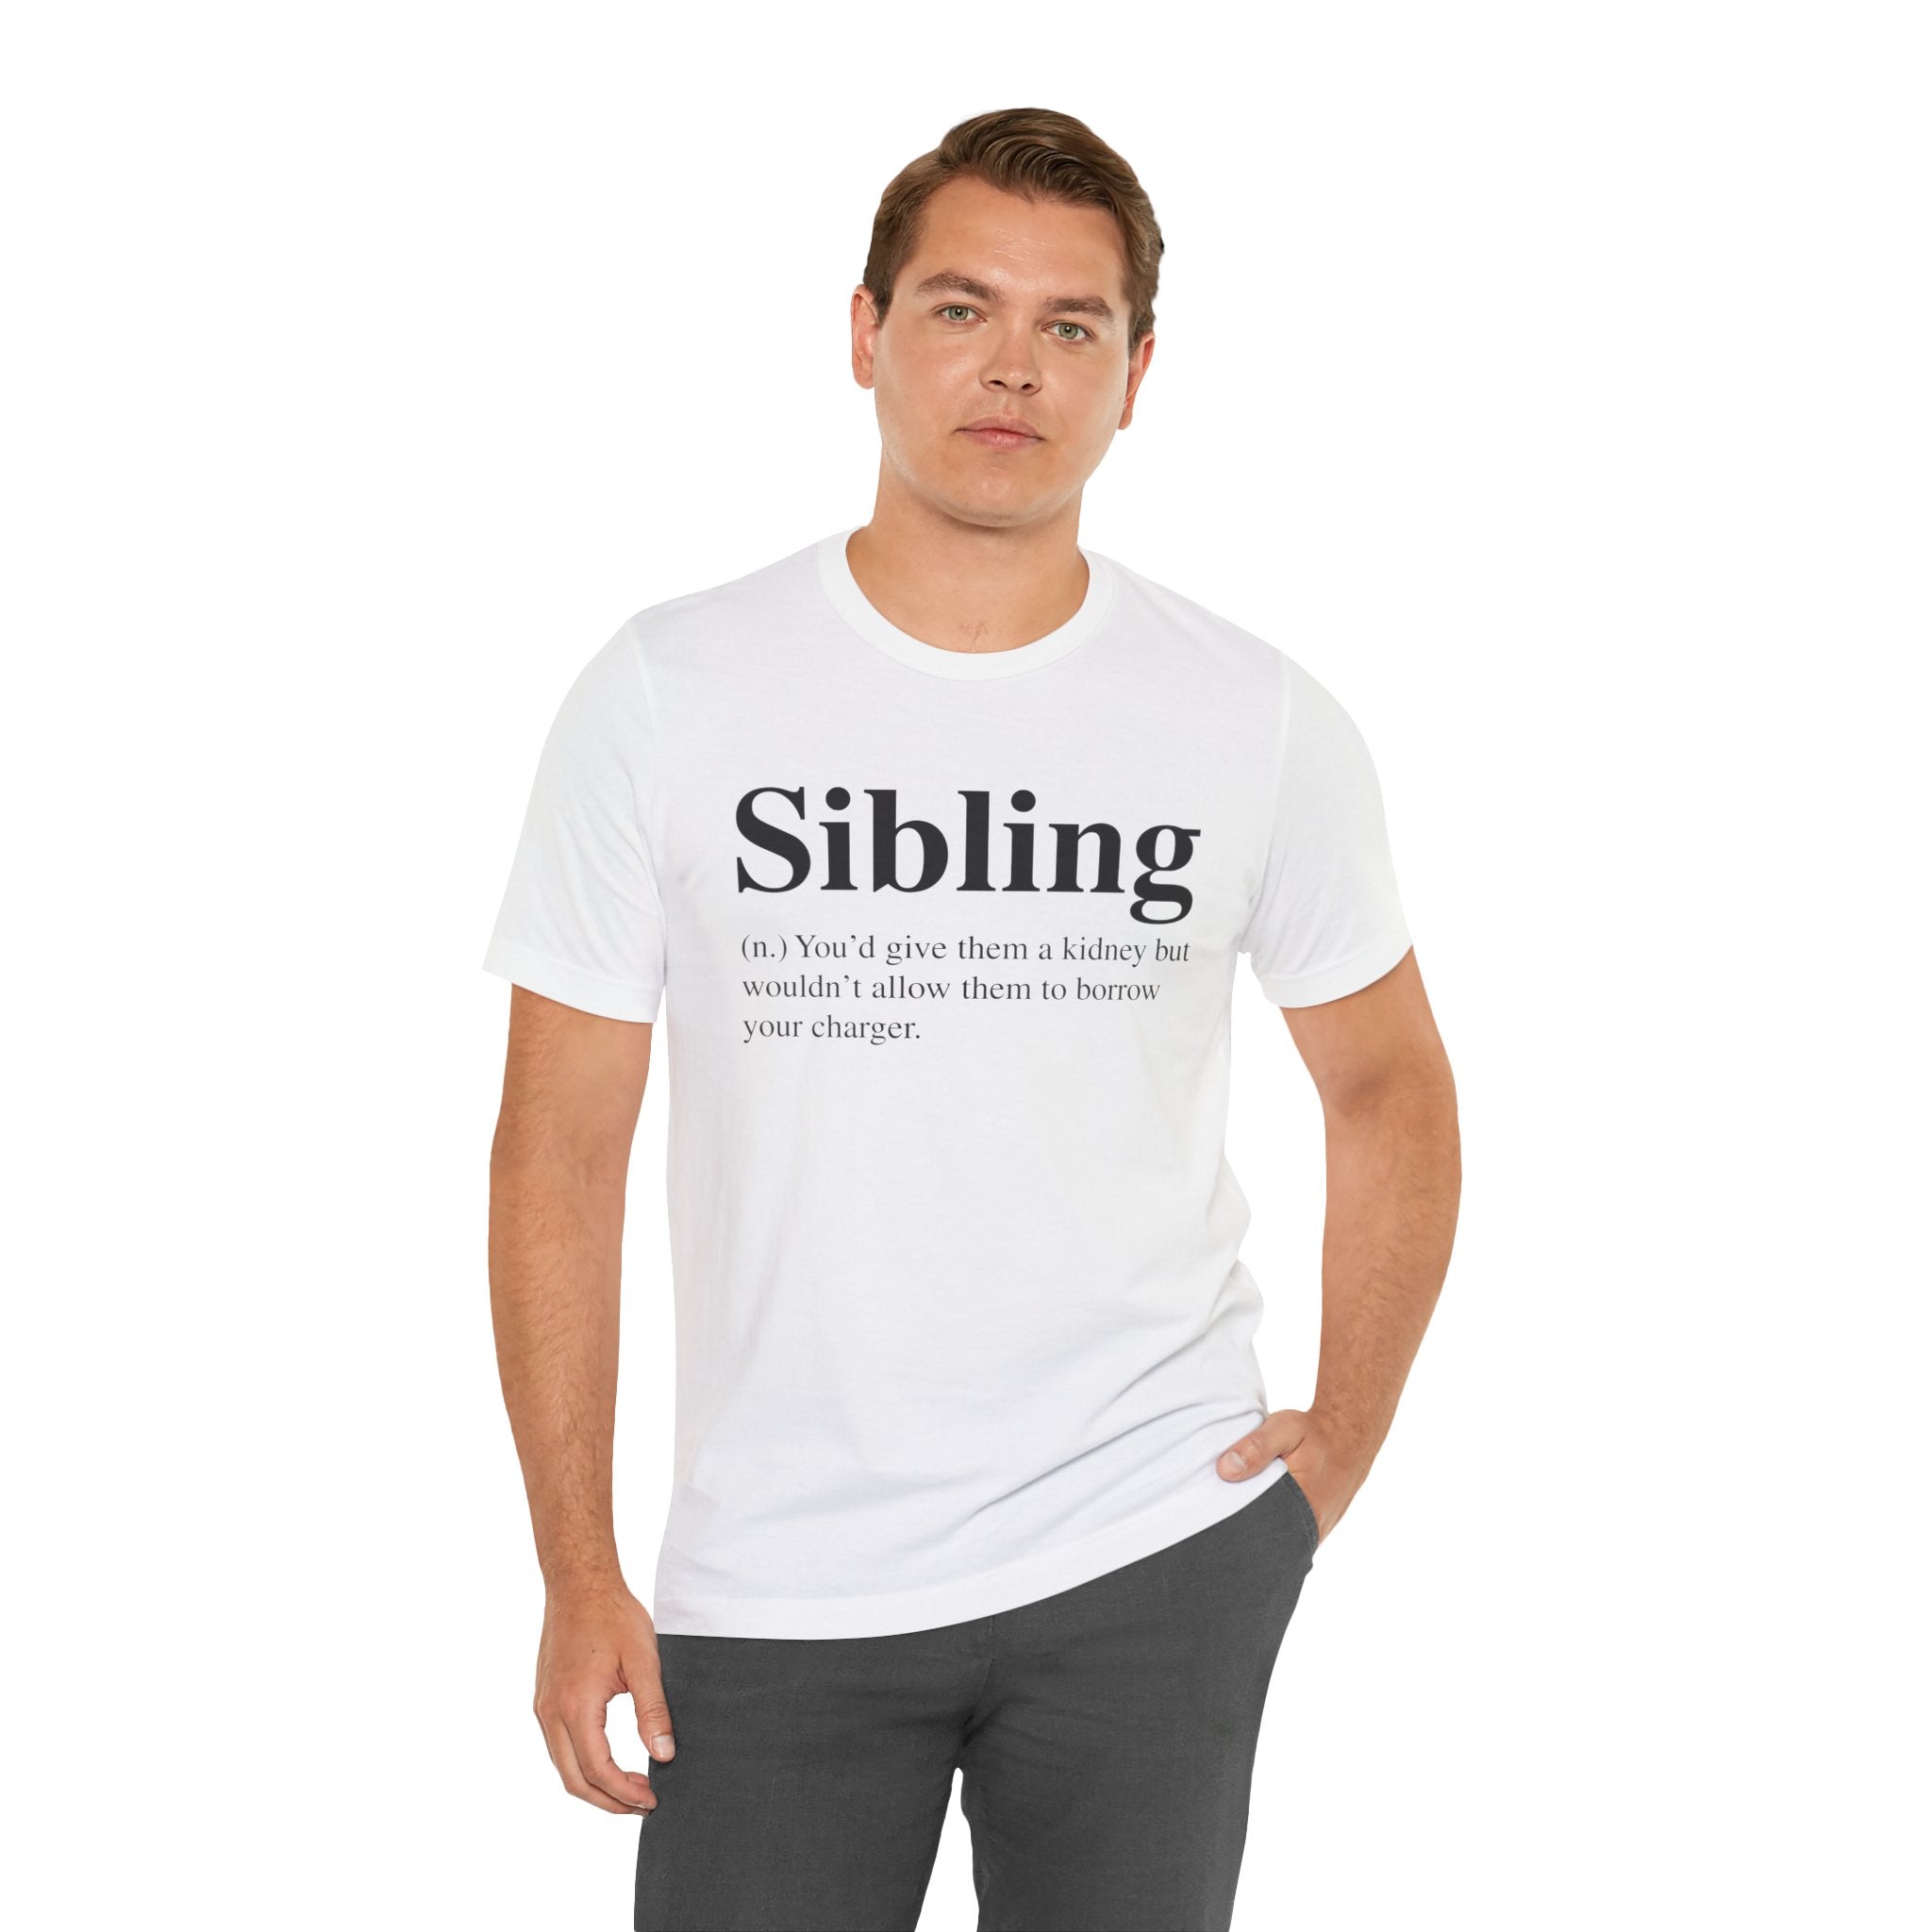 Man in a Sibling T-Shirt with the word "siblings" and a humorous definition printed on it, standing against a white background.